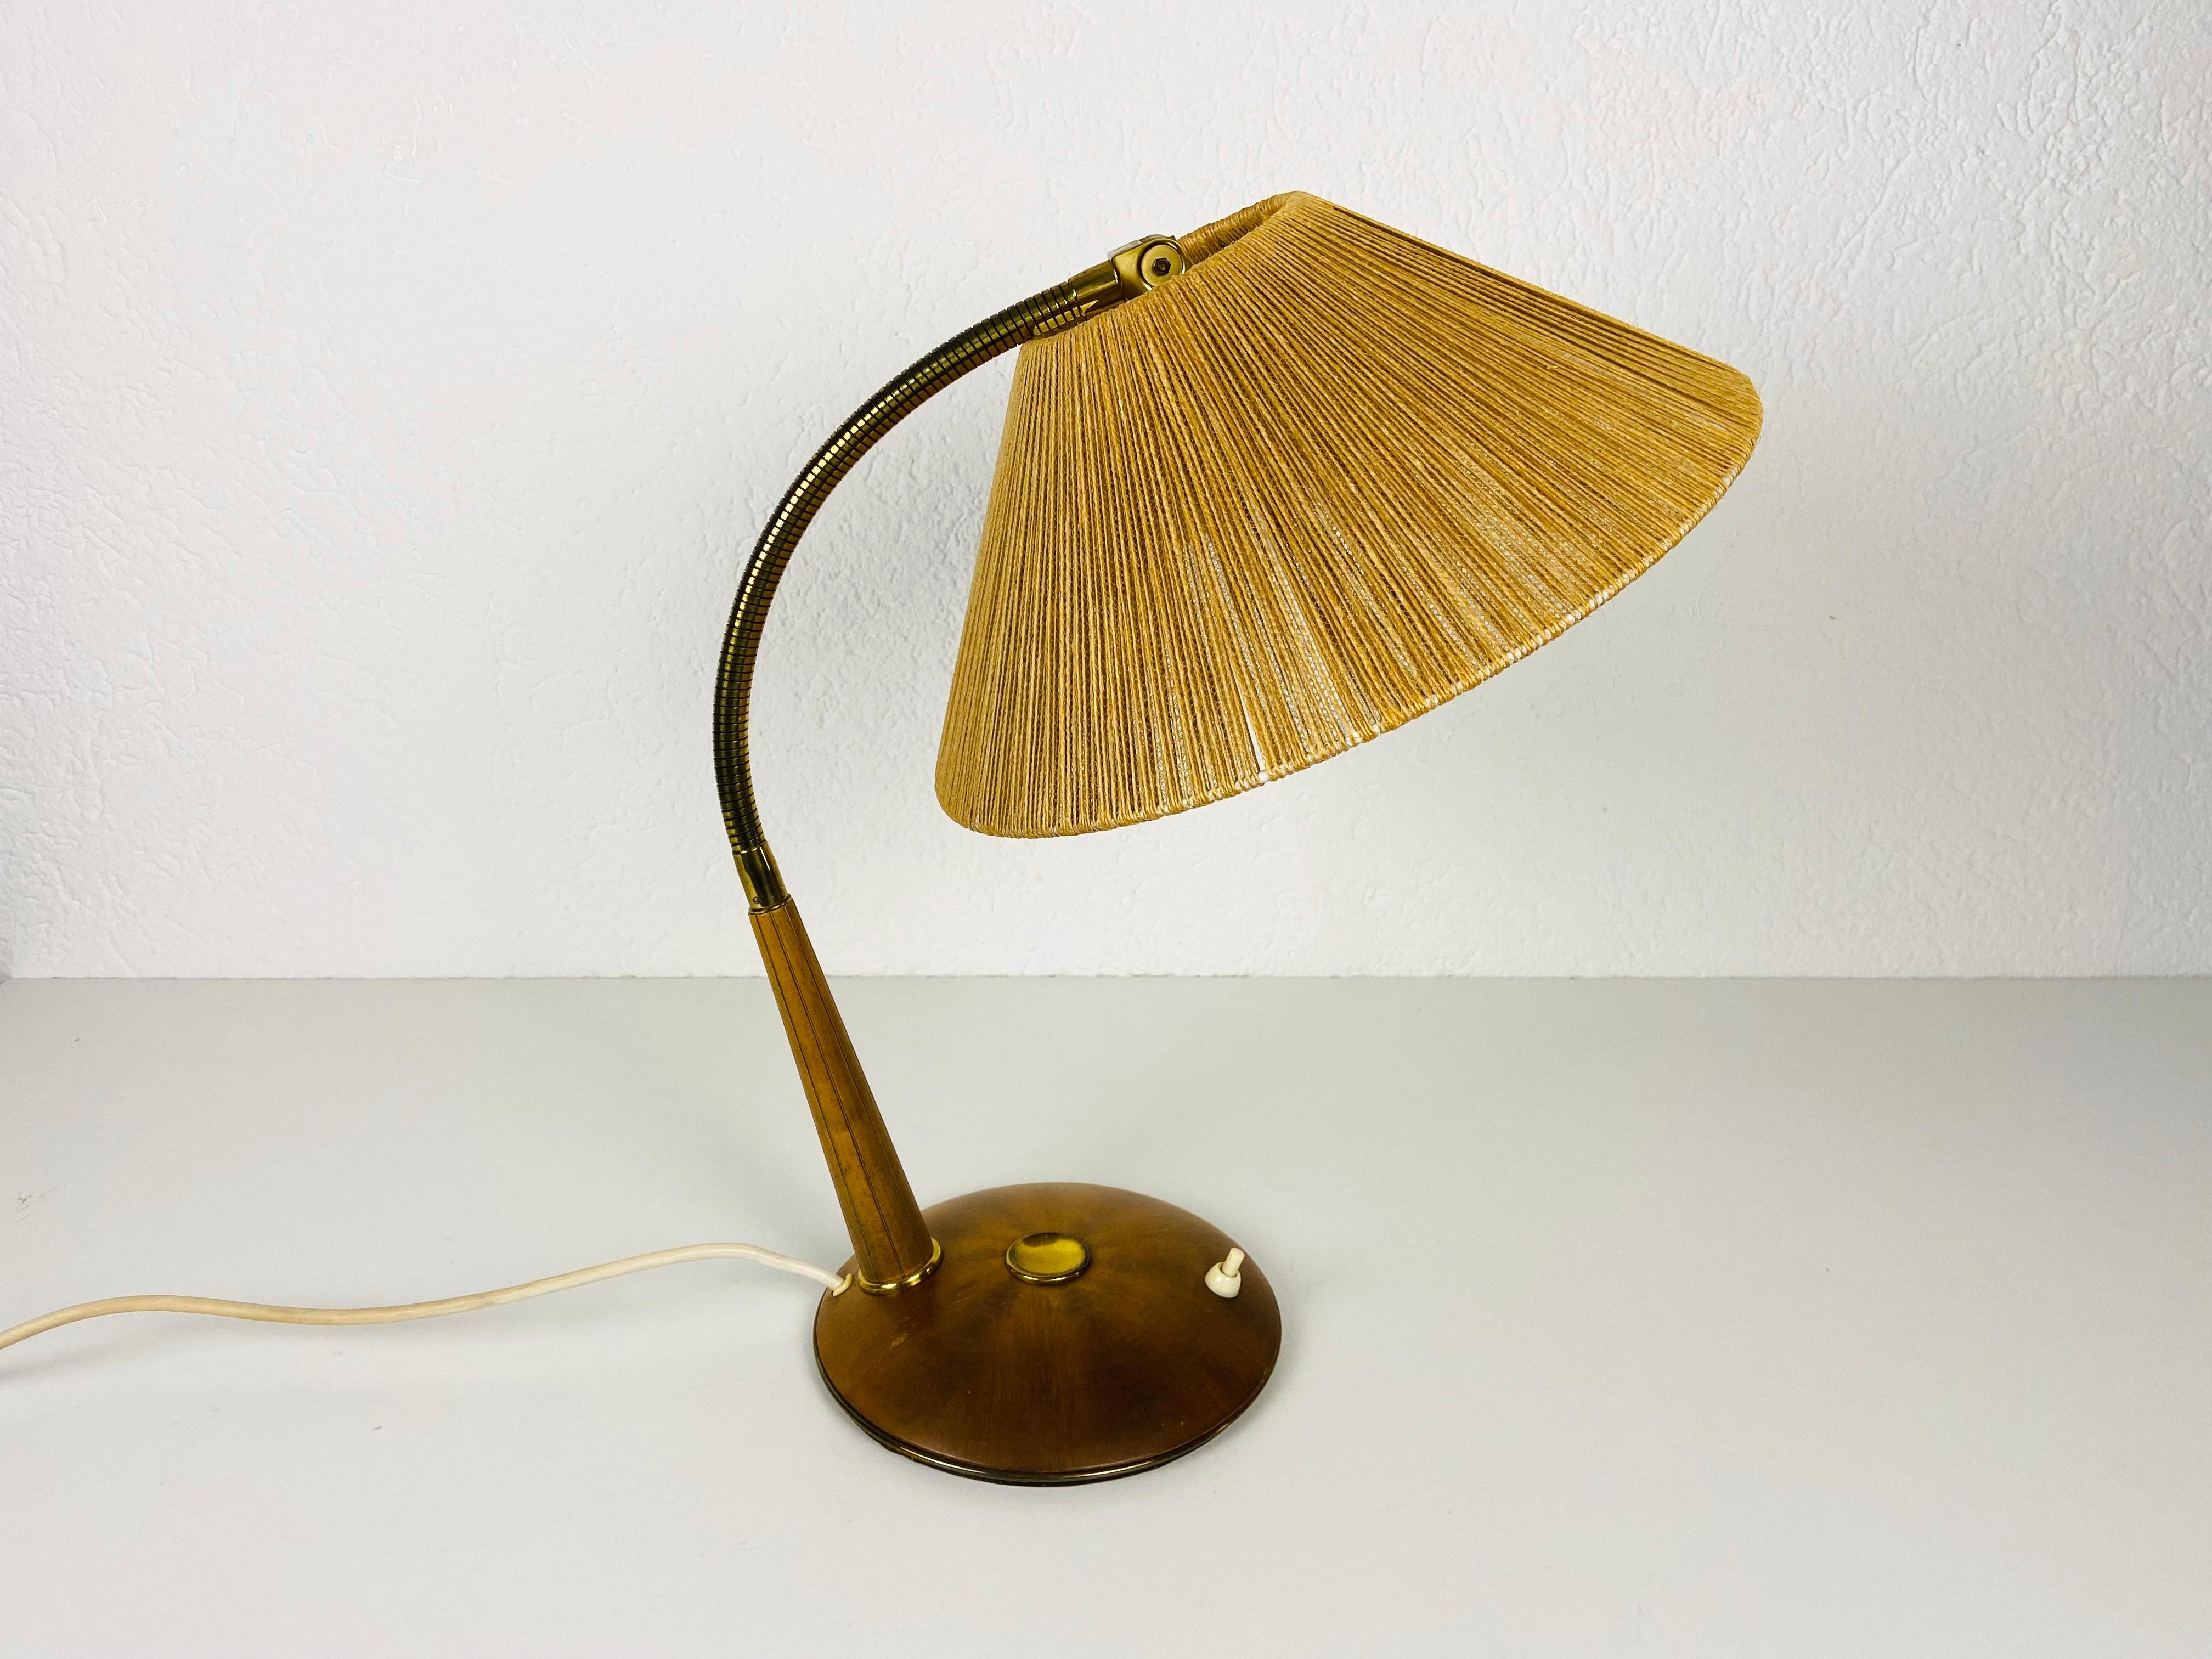 Midcentury Teak and Rattan Table Lamp by Temde, circa 1970 For Sale 14